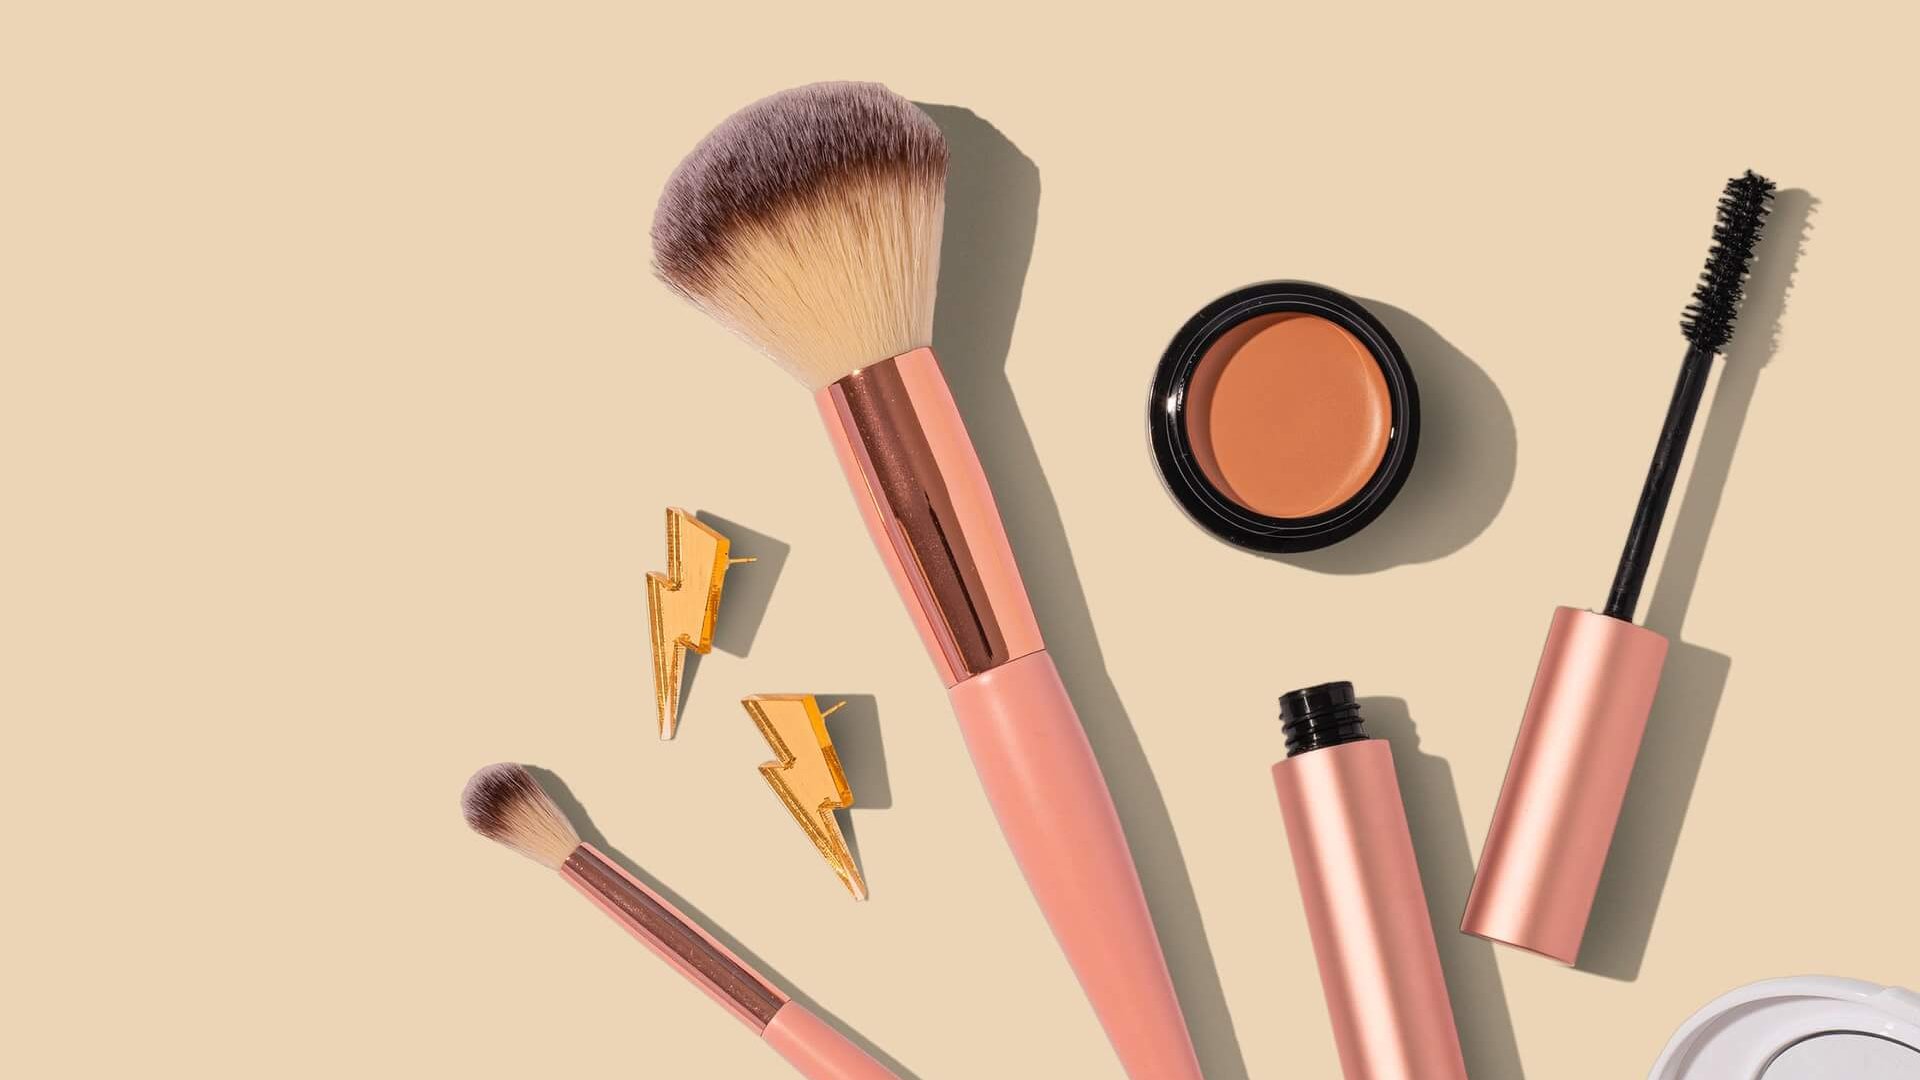 List of top affordable skincare and makeup brands in 2023